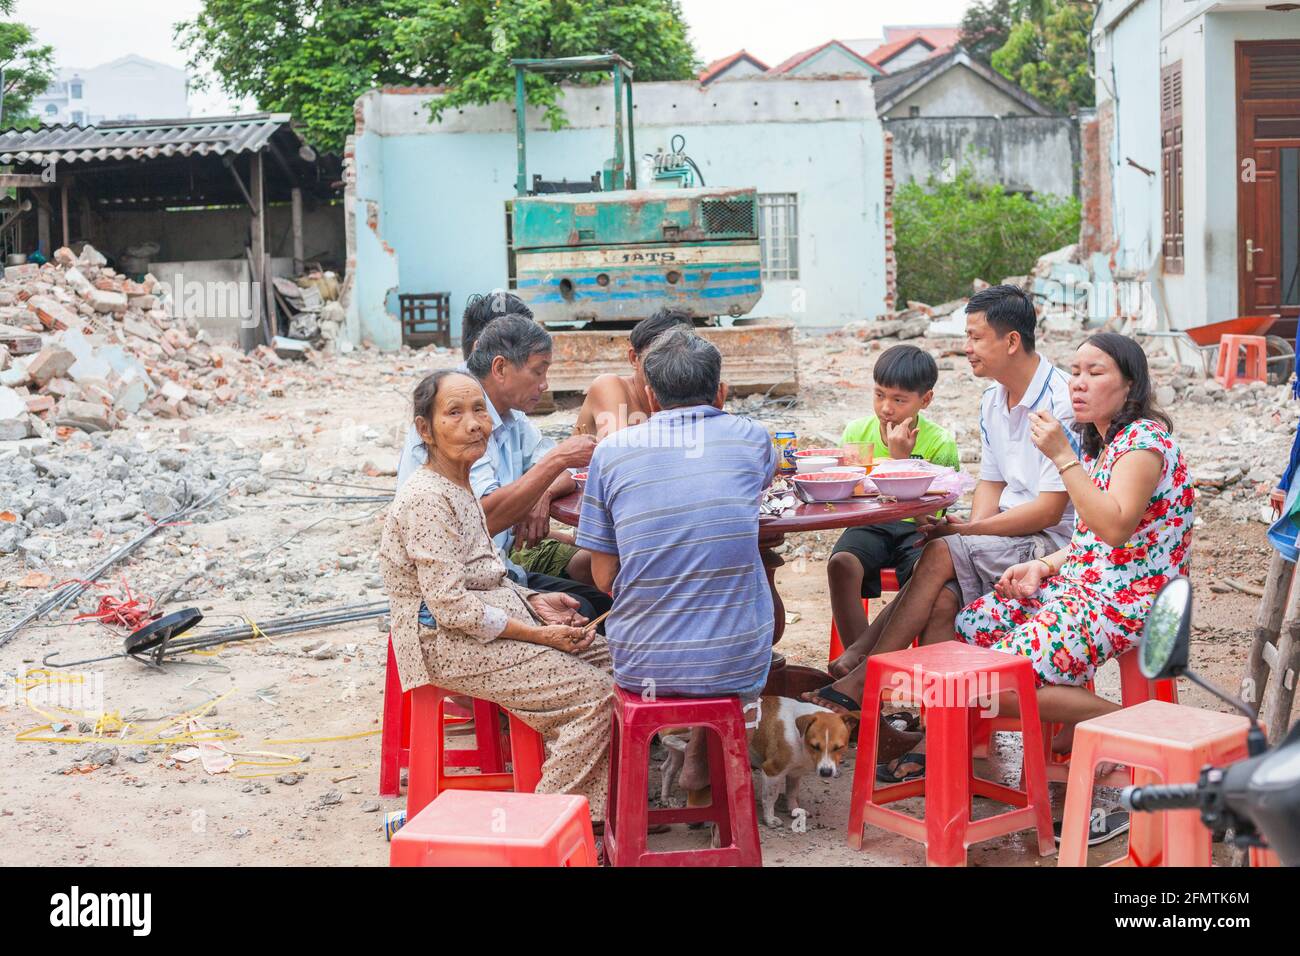 Vietnamese family having meal at table outside on waste ground with digger in background, Hoi An, Vietnam Stock Photo